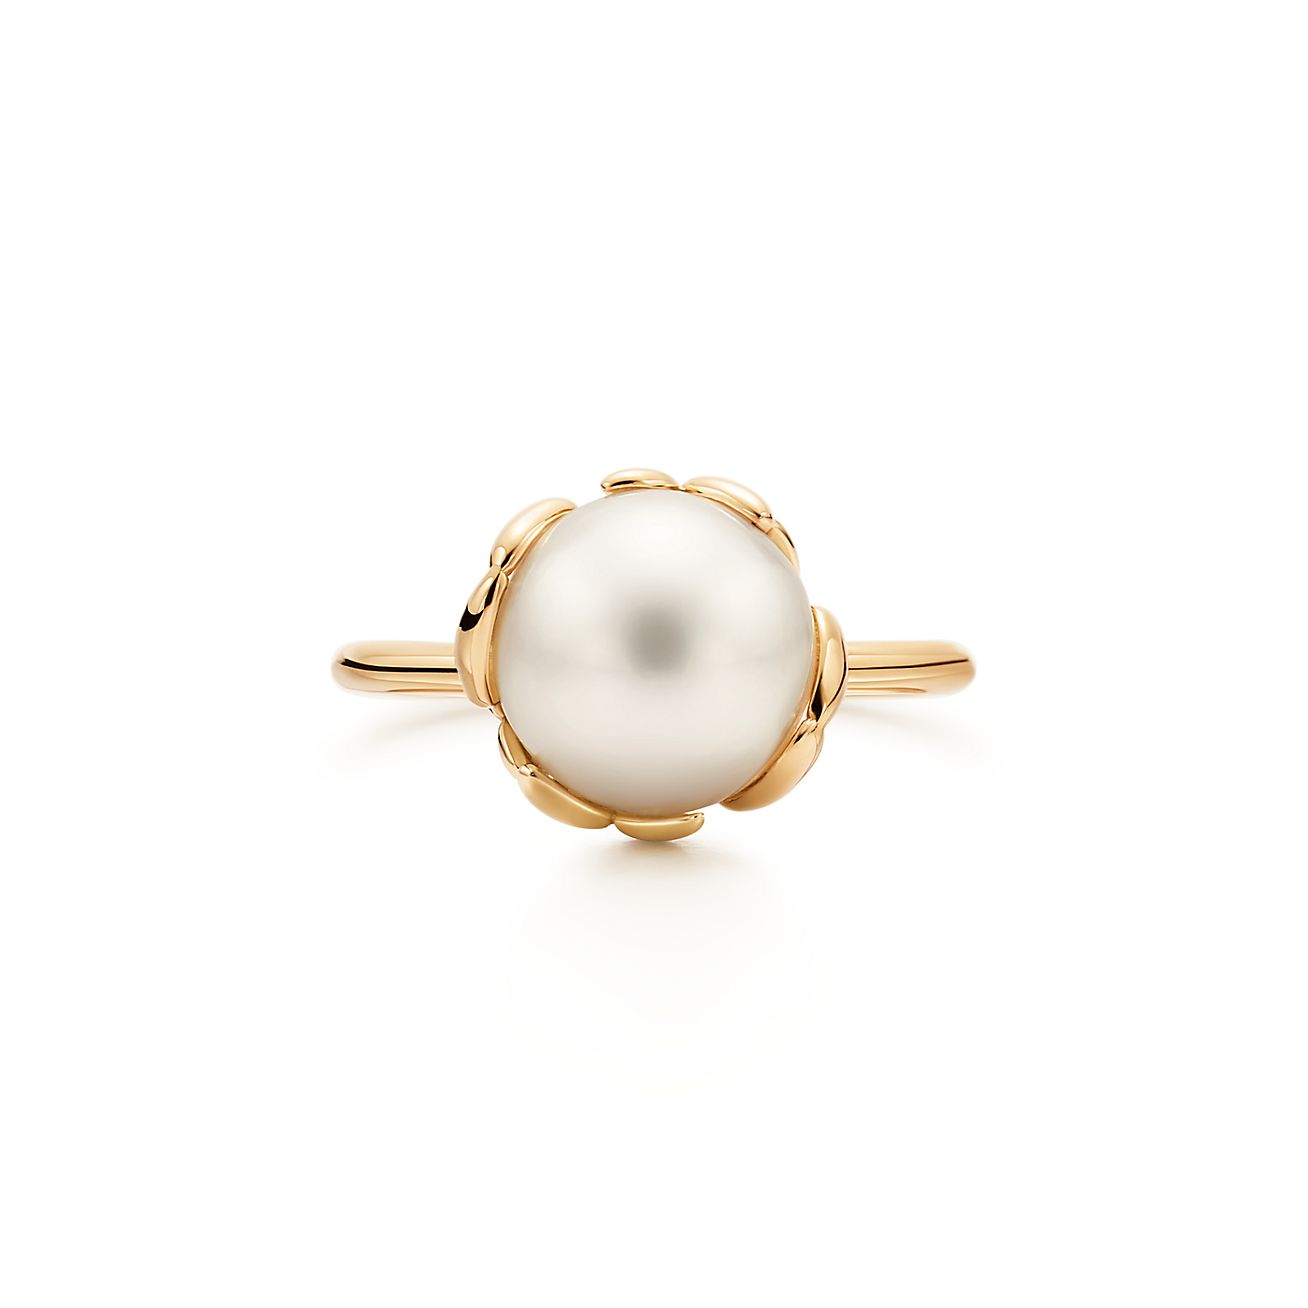 Paloma Picasso Olive Leaf Ring in 18K Gold with A Freshwater Cultured Pearl, Size: 8 1/2